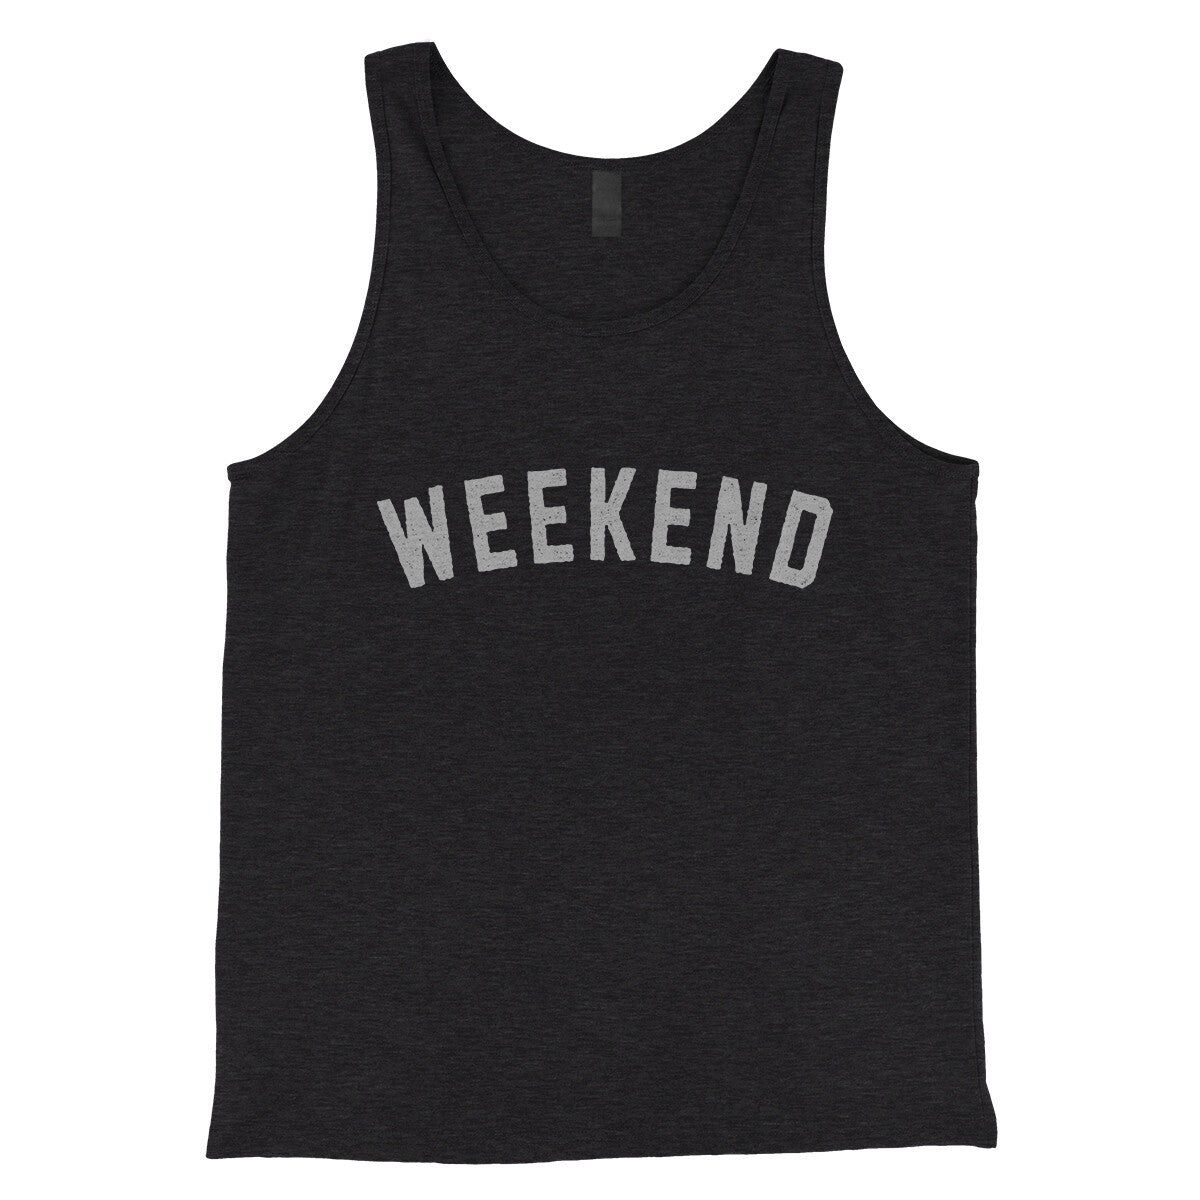 Weekend in Charcoal Black TriBlend Color